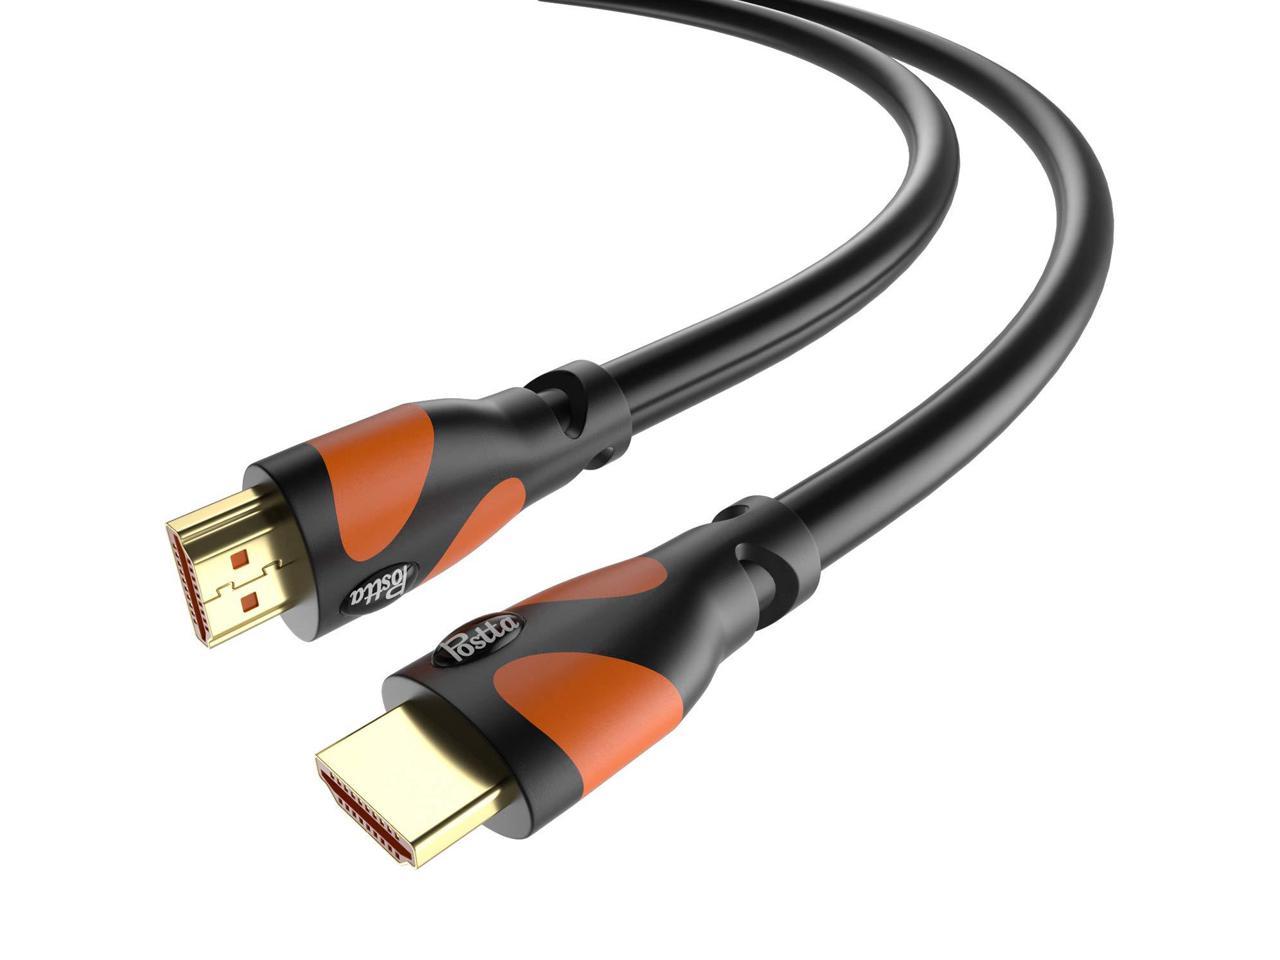 HDMI Cable 50 Feet Postta 4K HDMI2.0 Cable Support 4K(2160P),3D,1080P